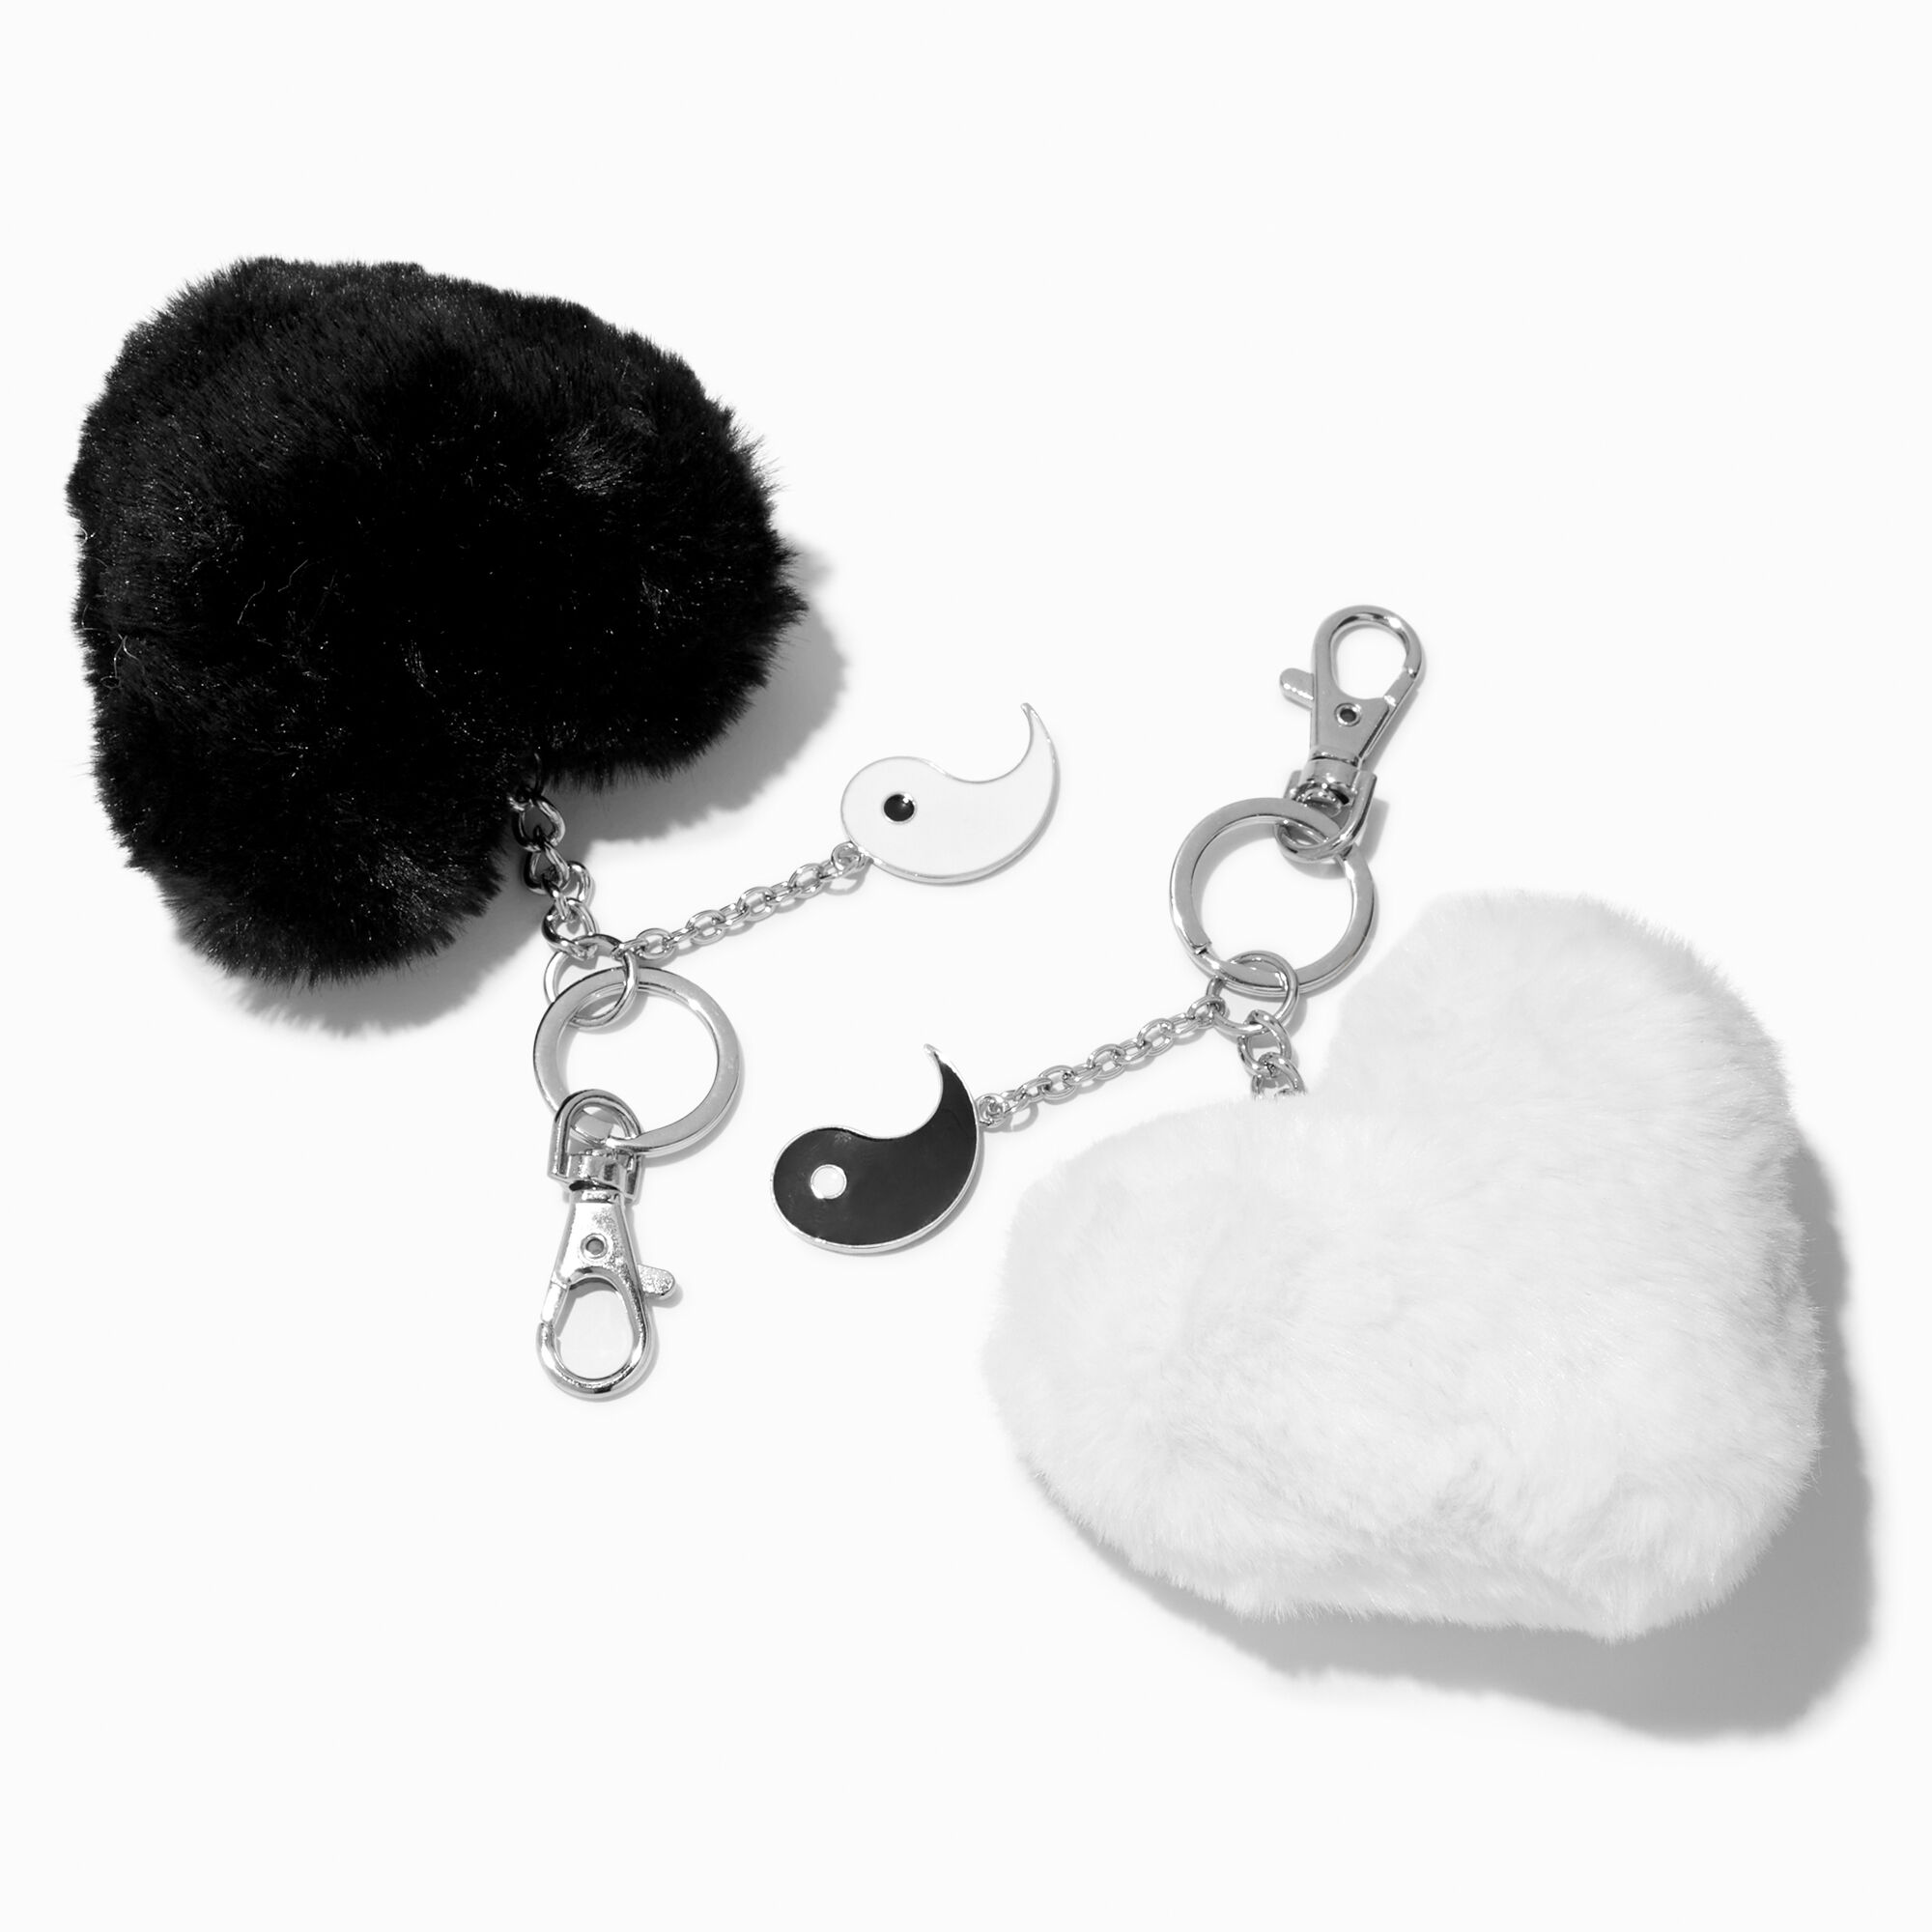 View Claires Best Friends Yin Yang Hearts Pom Keyrings 2 Pack Silver information